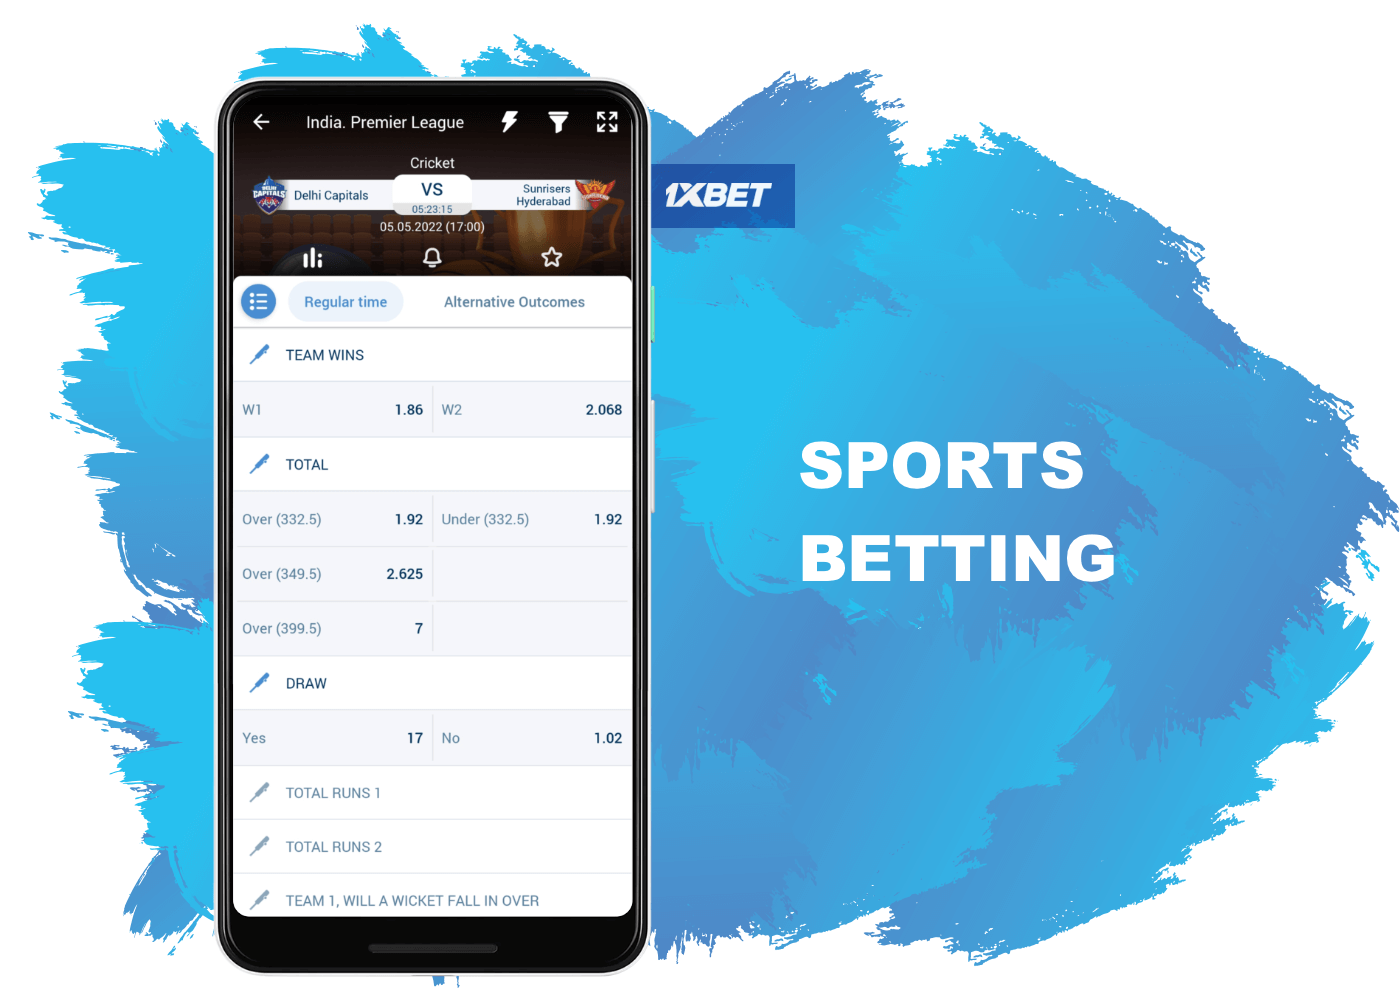 Bet on sports, including on favorite teams, with the 1xbet mobile app